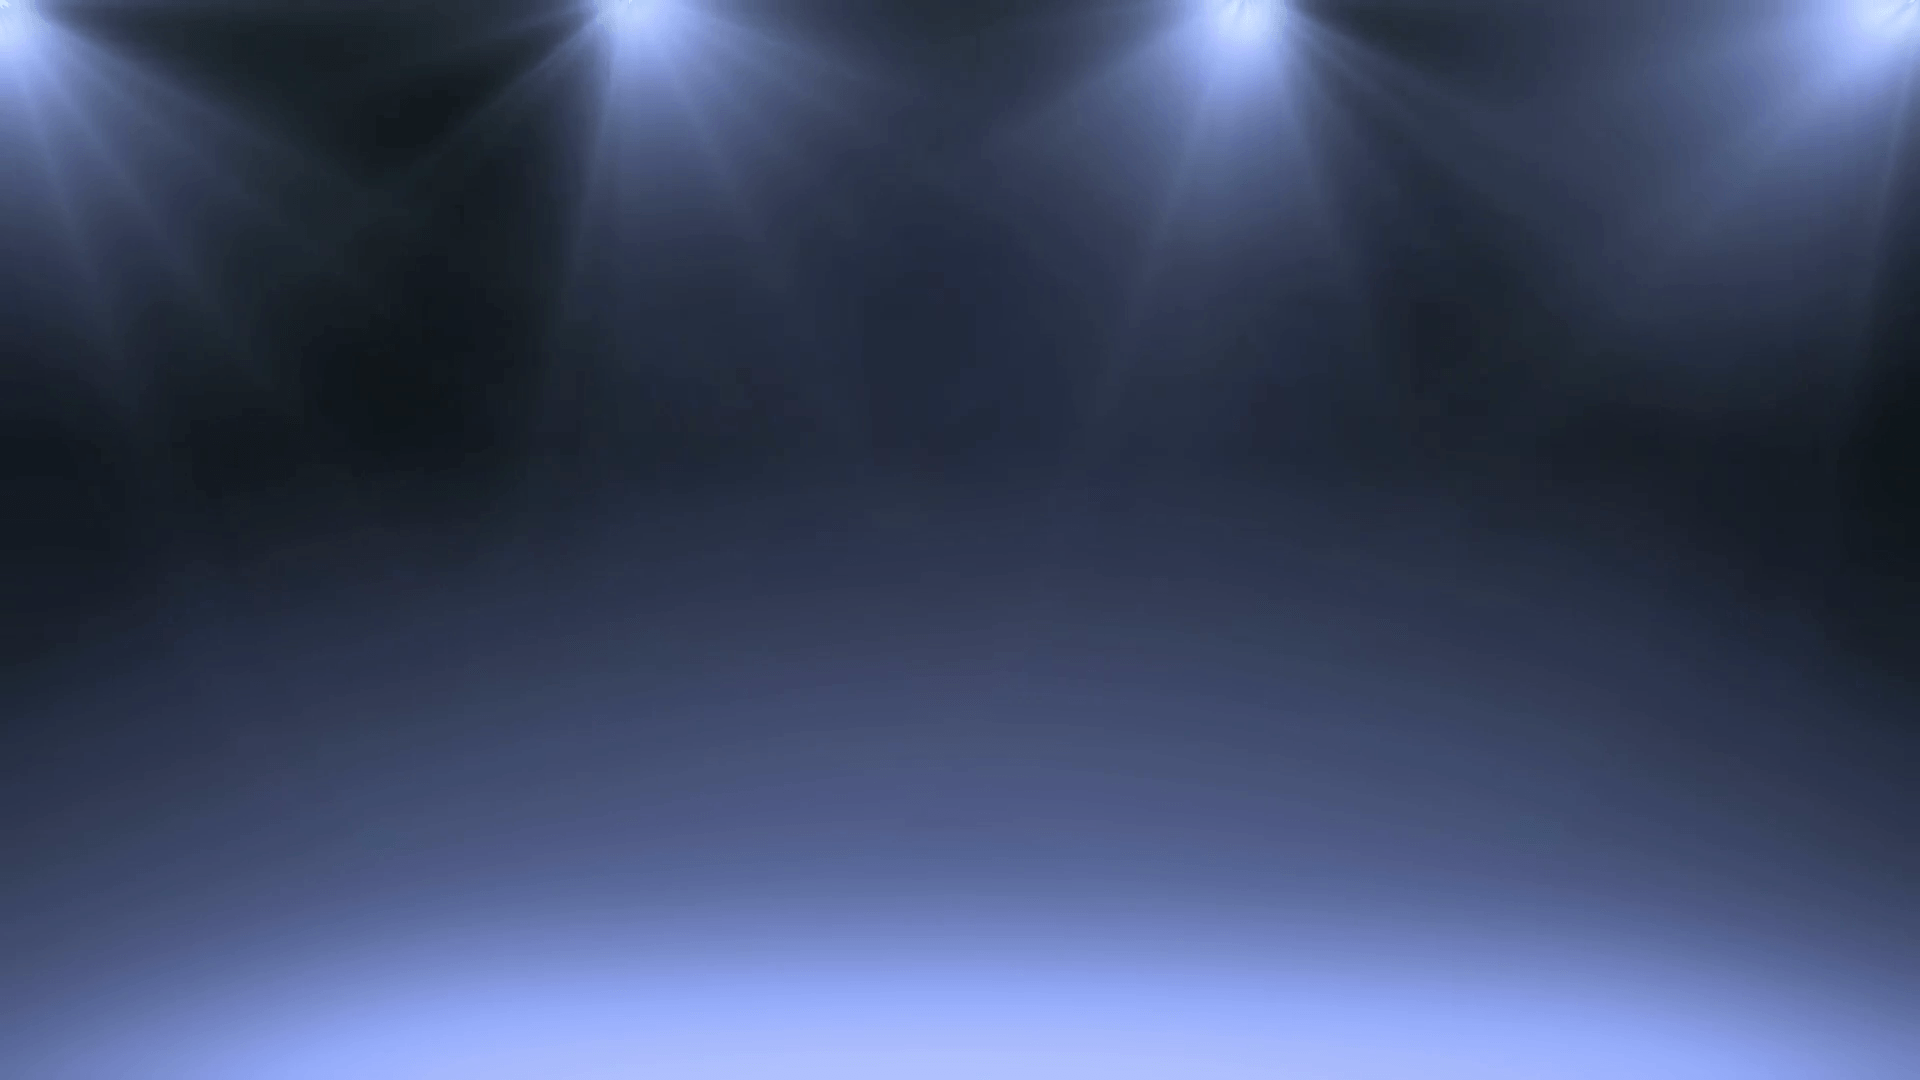 Animated Dark Blue Stage with Spotlights Background. Motion